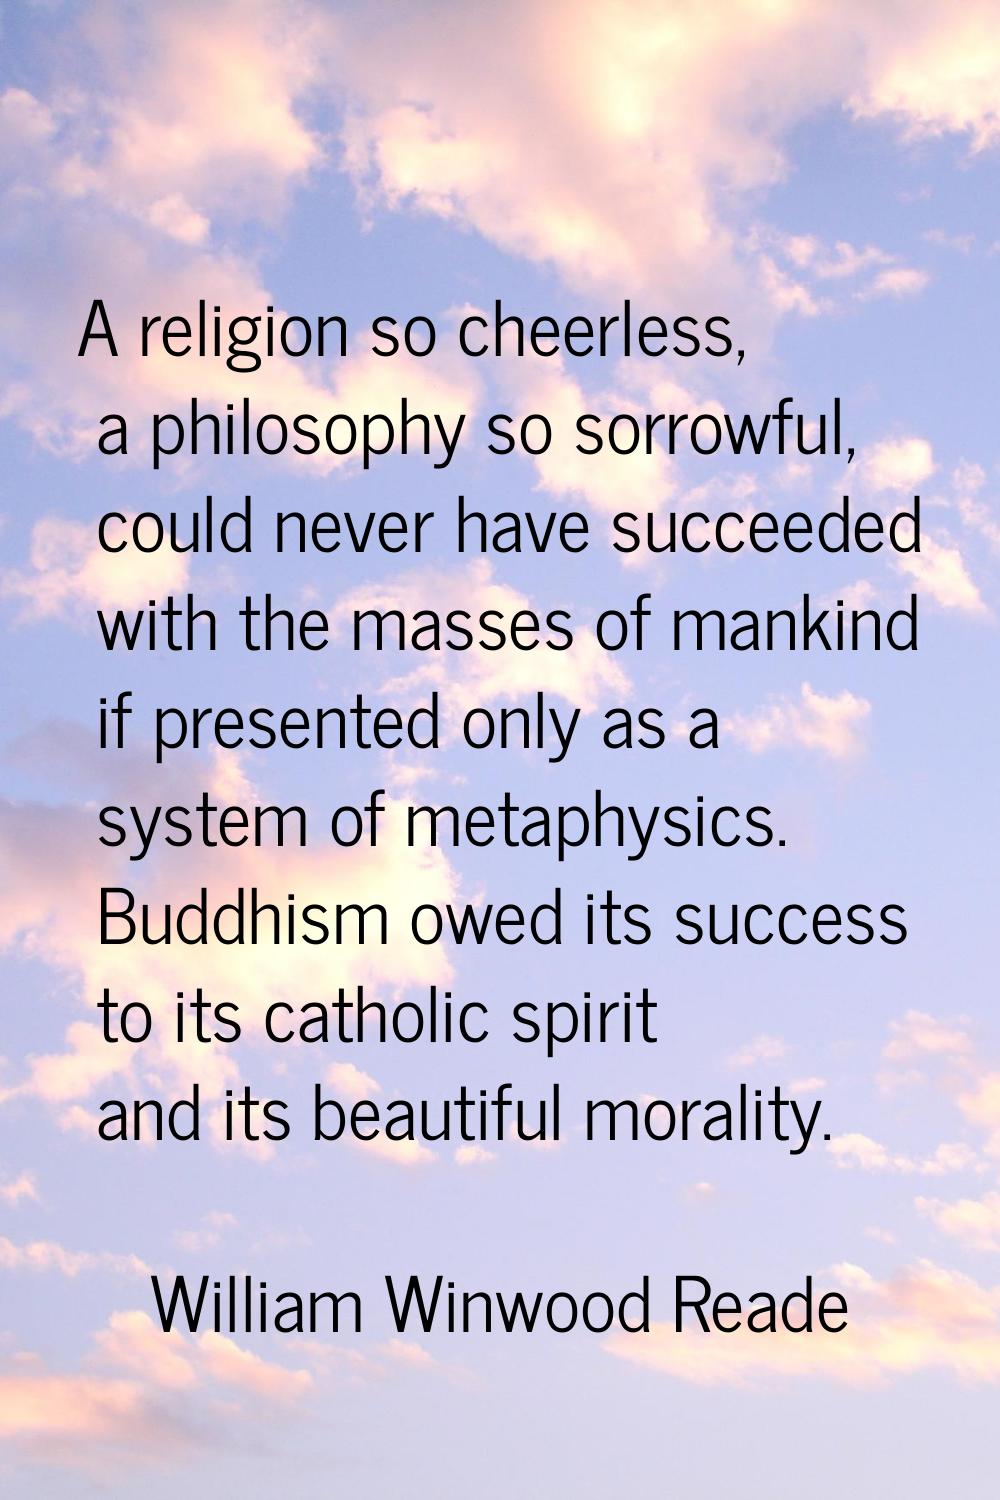 A religion so cheerless, a philosophy so sorrowful, could never have succeeded with the masses of m